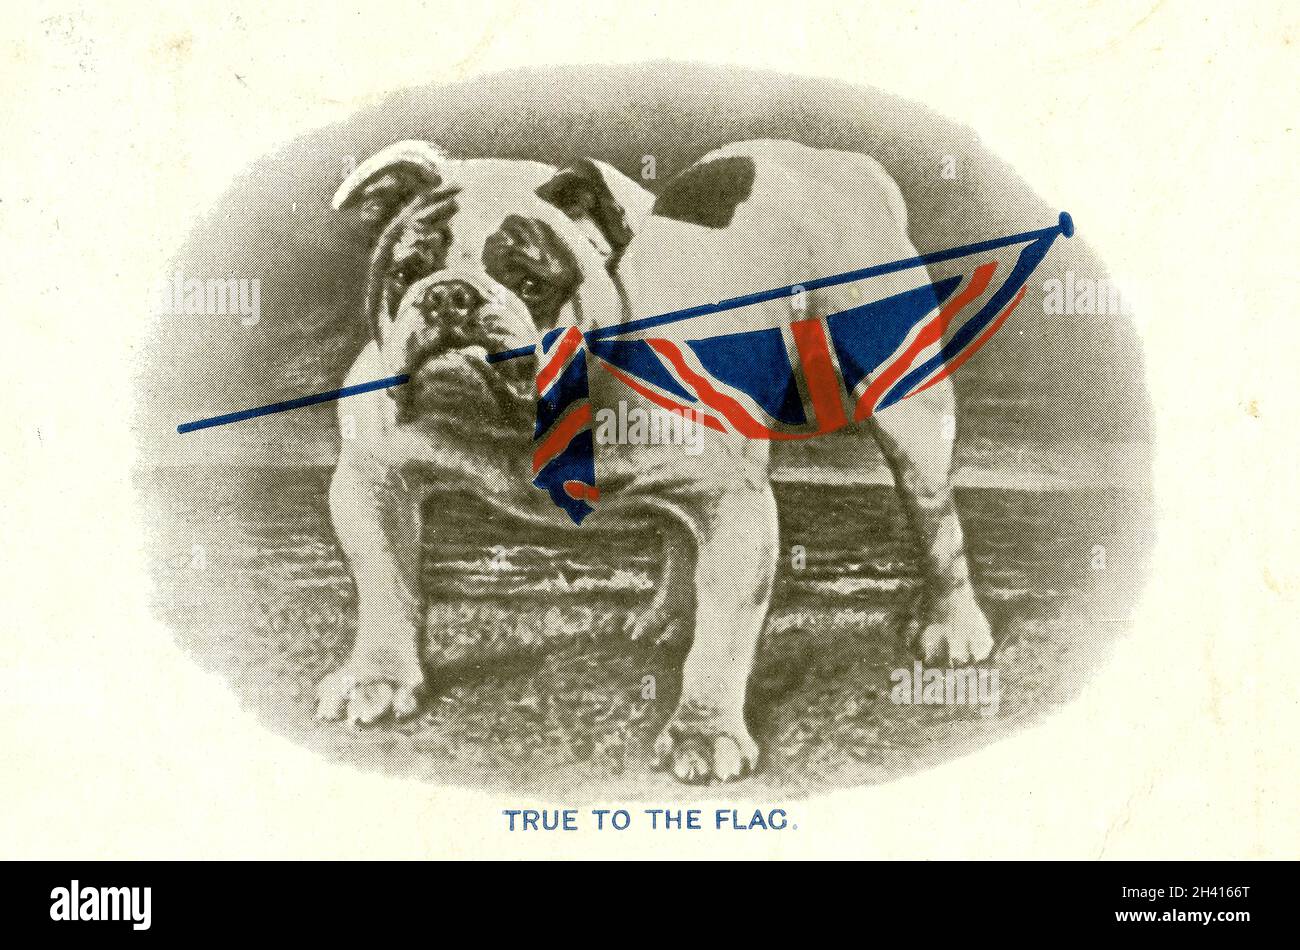 Original WW1 era postcard of bulldog holding a Union Jack flag, True to the flag, Tennyson quote Britons hold your own, by C.W. Faulkner & Co.Ltd London series 1458, posted 19 Oct 1914 Stock Photo